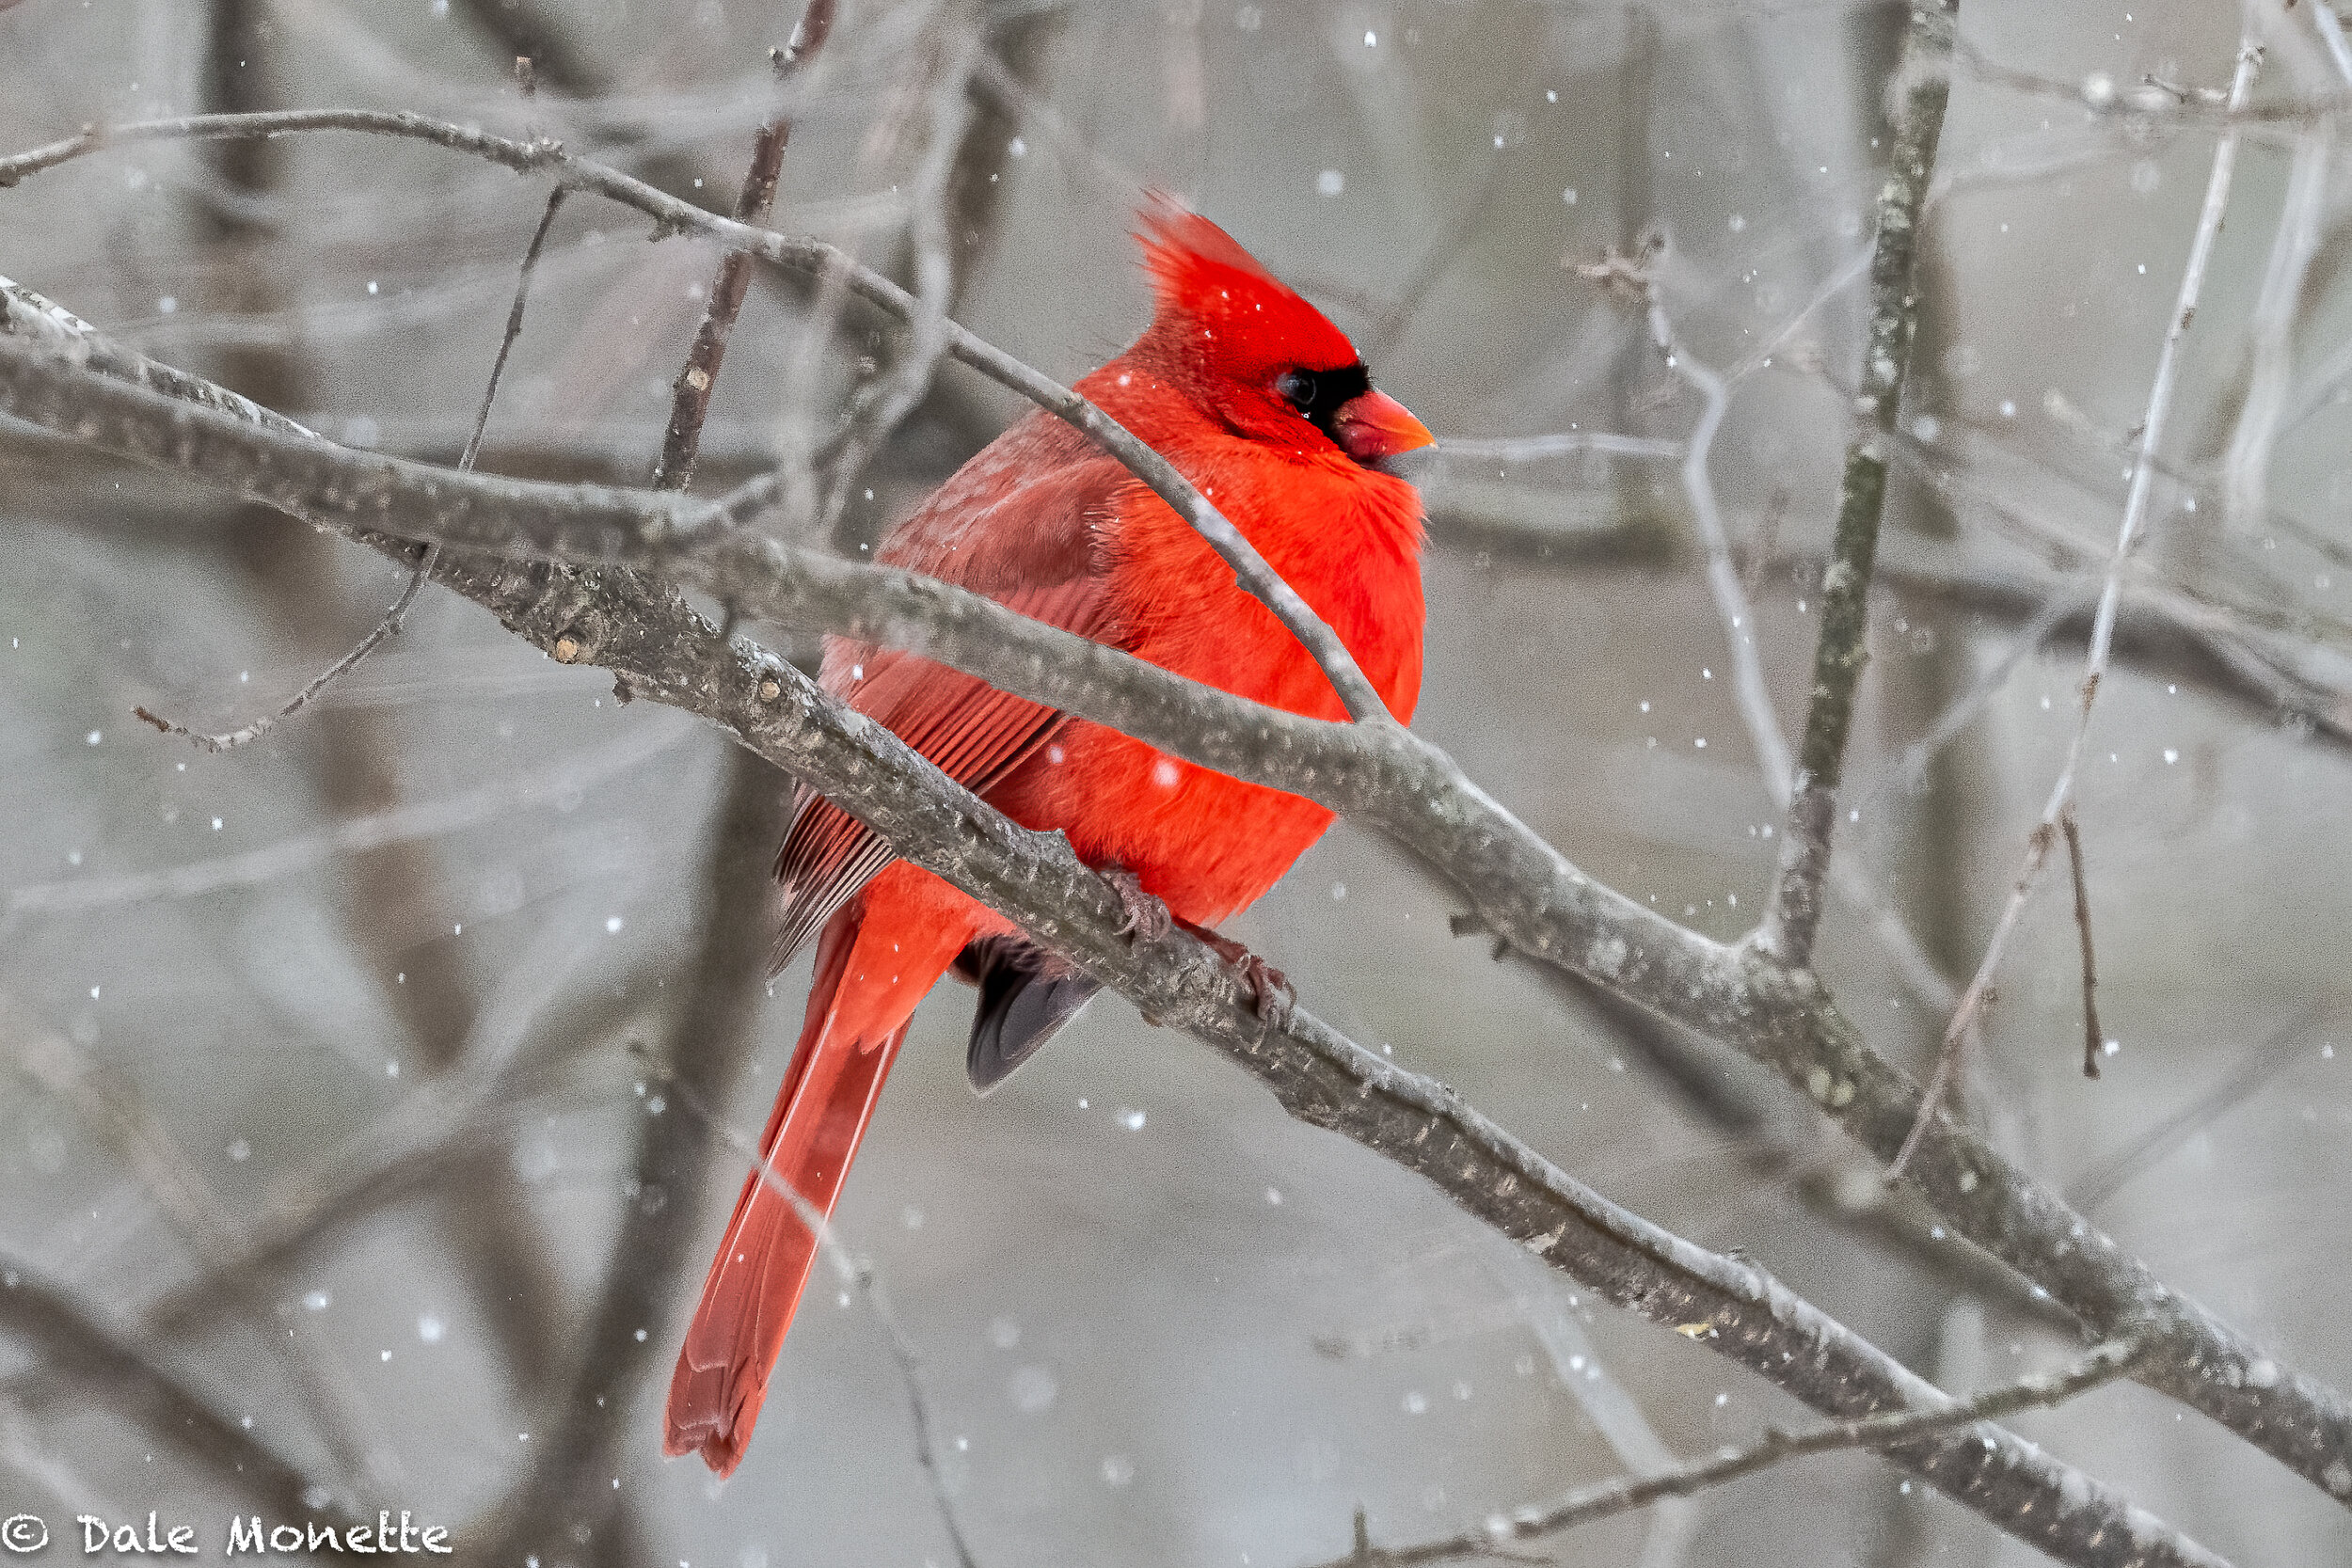   Our male cardinal that comes at sunrise and sunset…. once in a while he and his mate will visit in mid day together.  Its always a treat to see them.  